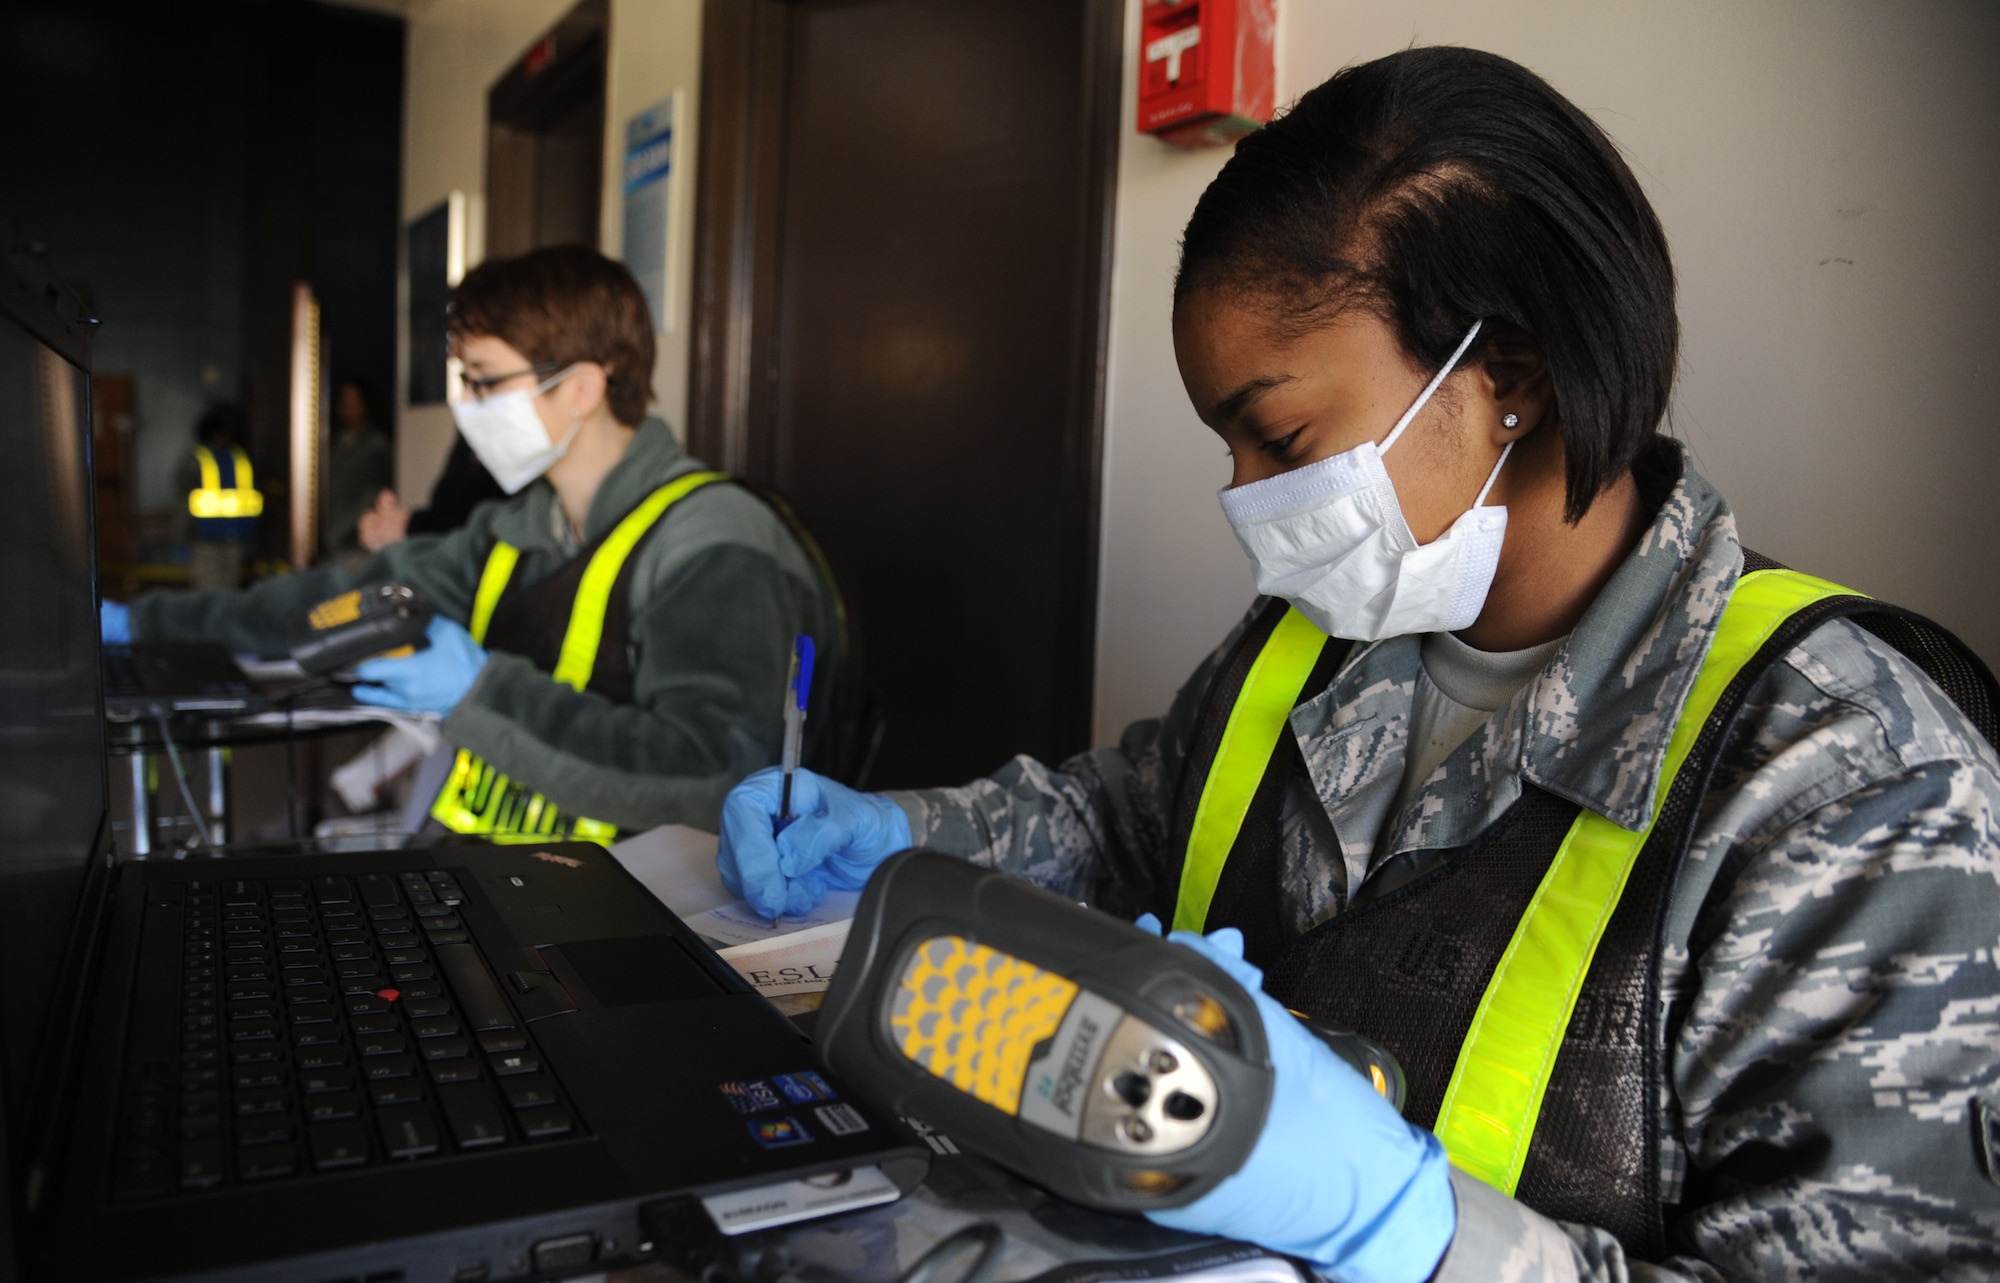 Staff Sgt. Barbara Panama, 81st Surgical Operations Squadron, and Airman 1st Class Cierra Simmons, 81st Medical Support Squadron, serve as patient administration during a disease containment plan and point of dispensing exercise Feb. 27, 2014, at the Vandenberg Community Center, Keesler Air Force Base, Miss. The scenario included a steep rise in the number of patients with flu-like symptoms and the medical group distributing large quantities of influenza medications and vaccinations.  (U.S. Air Force photo by Kemberly Groue)